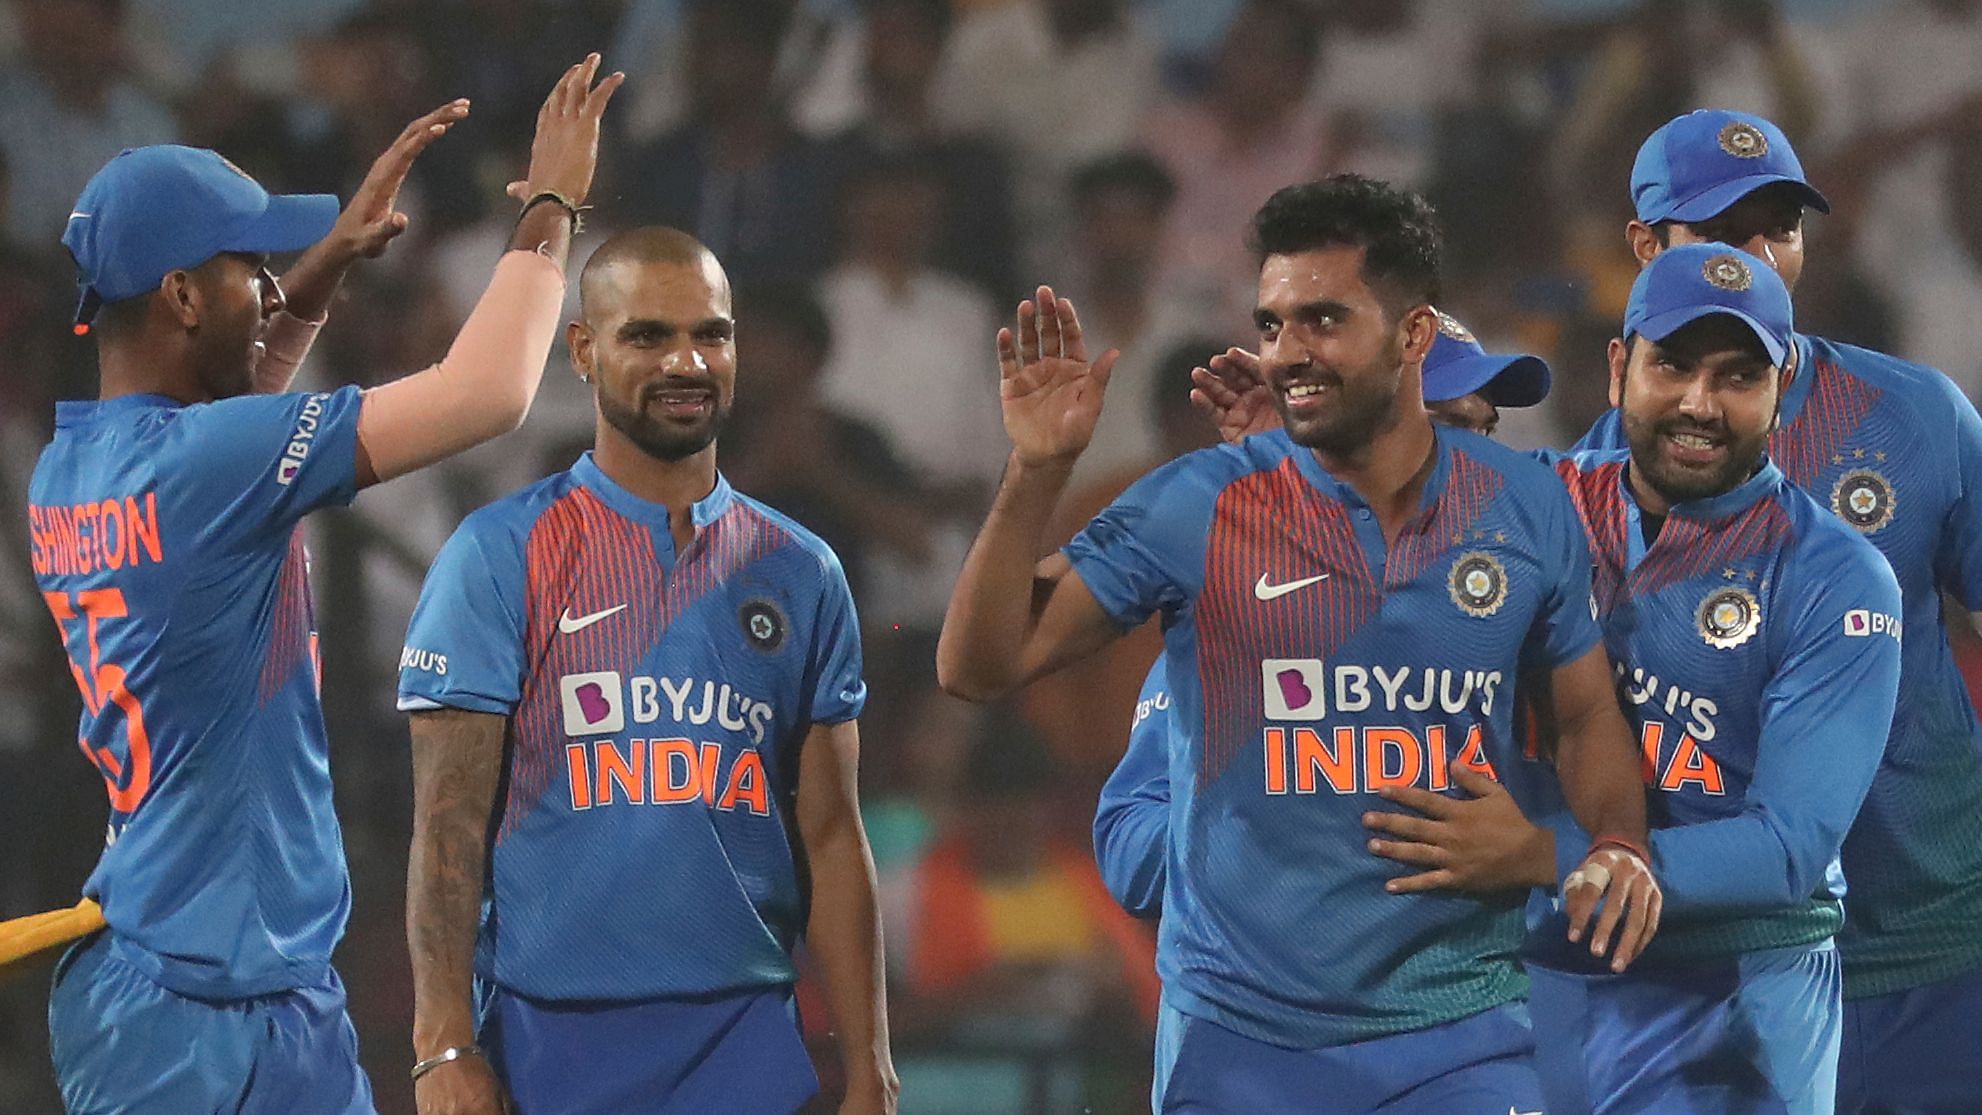 A brilliant bowling performance by Deepak Chahar (6/7) helped India beat Bangladesh by 30 runs in the third T20I.